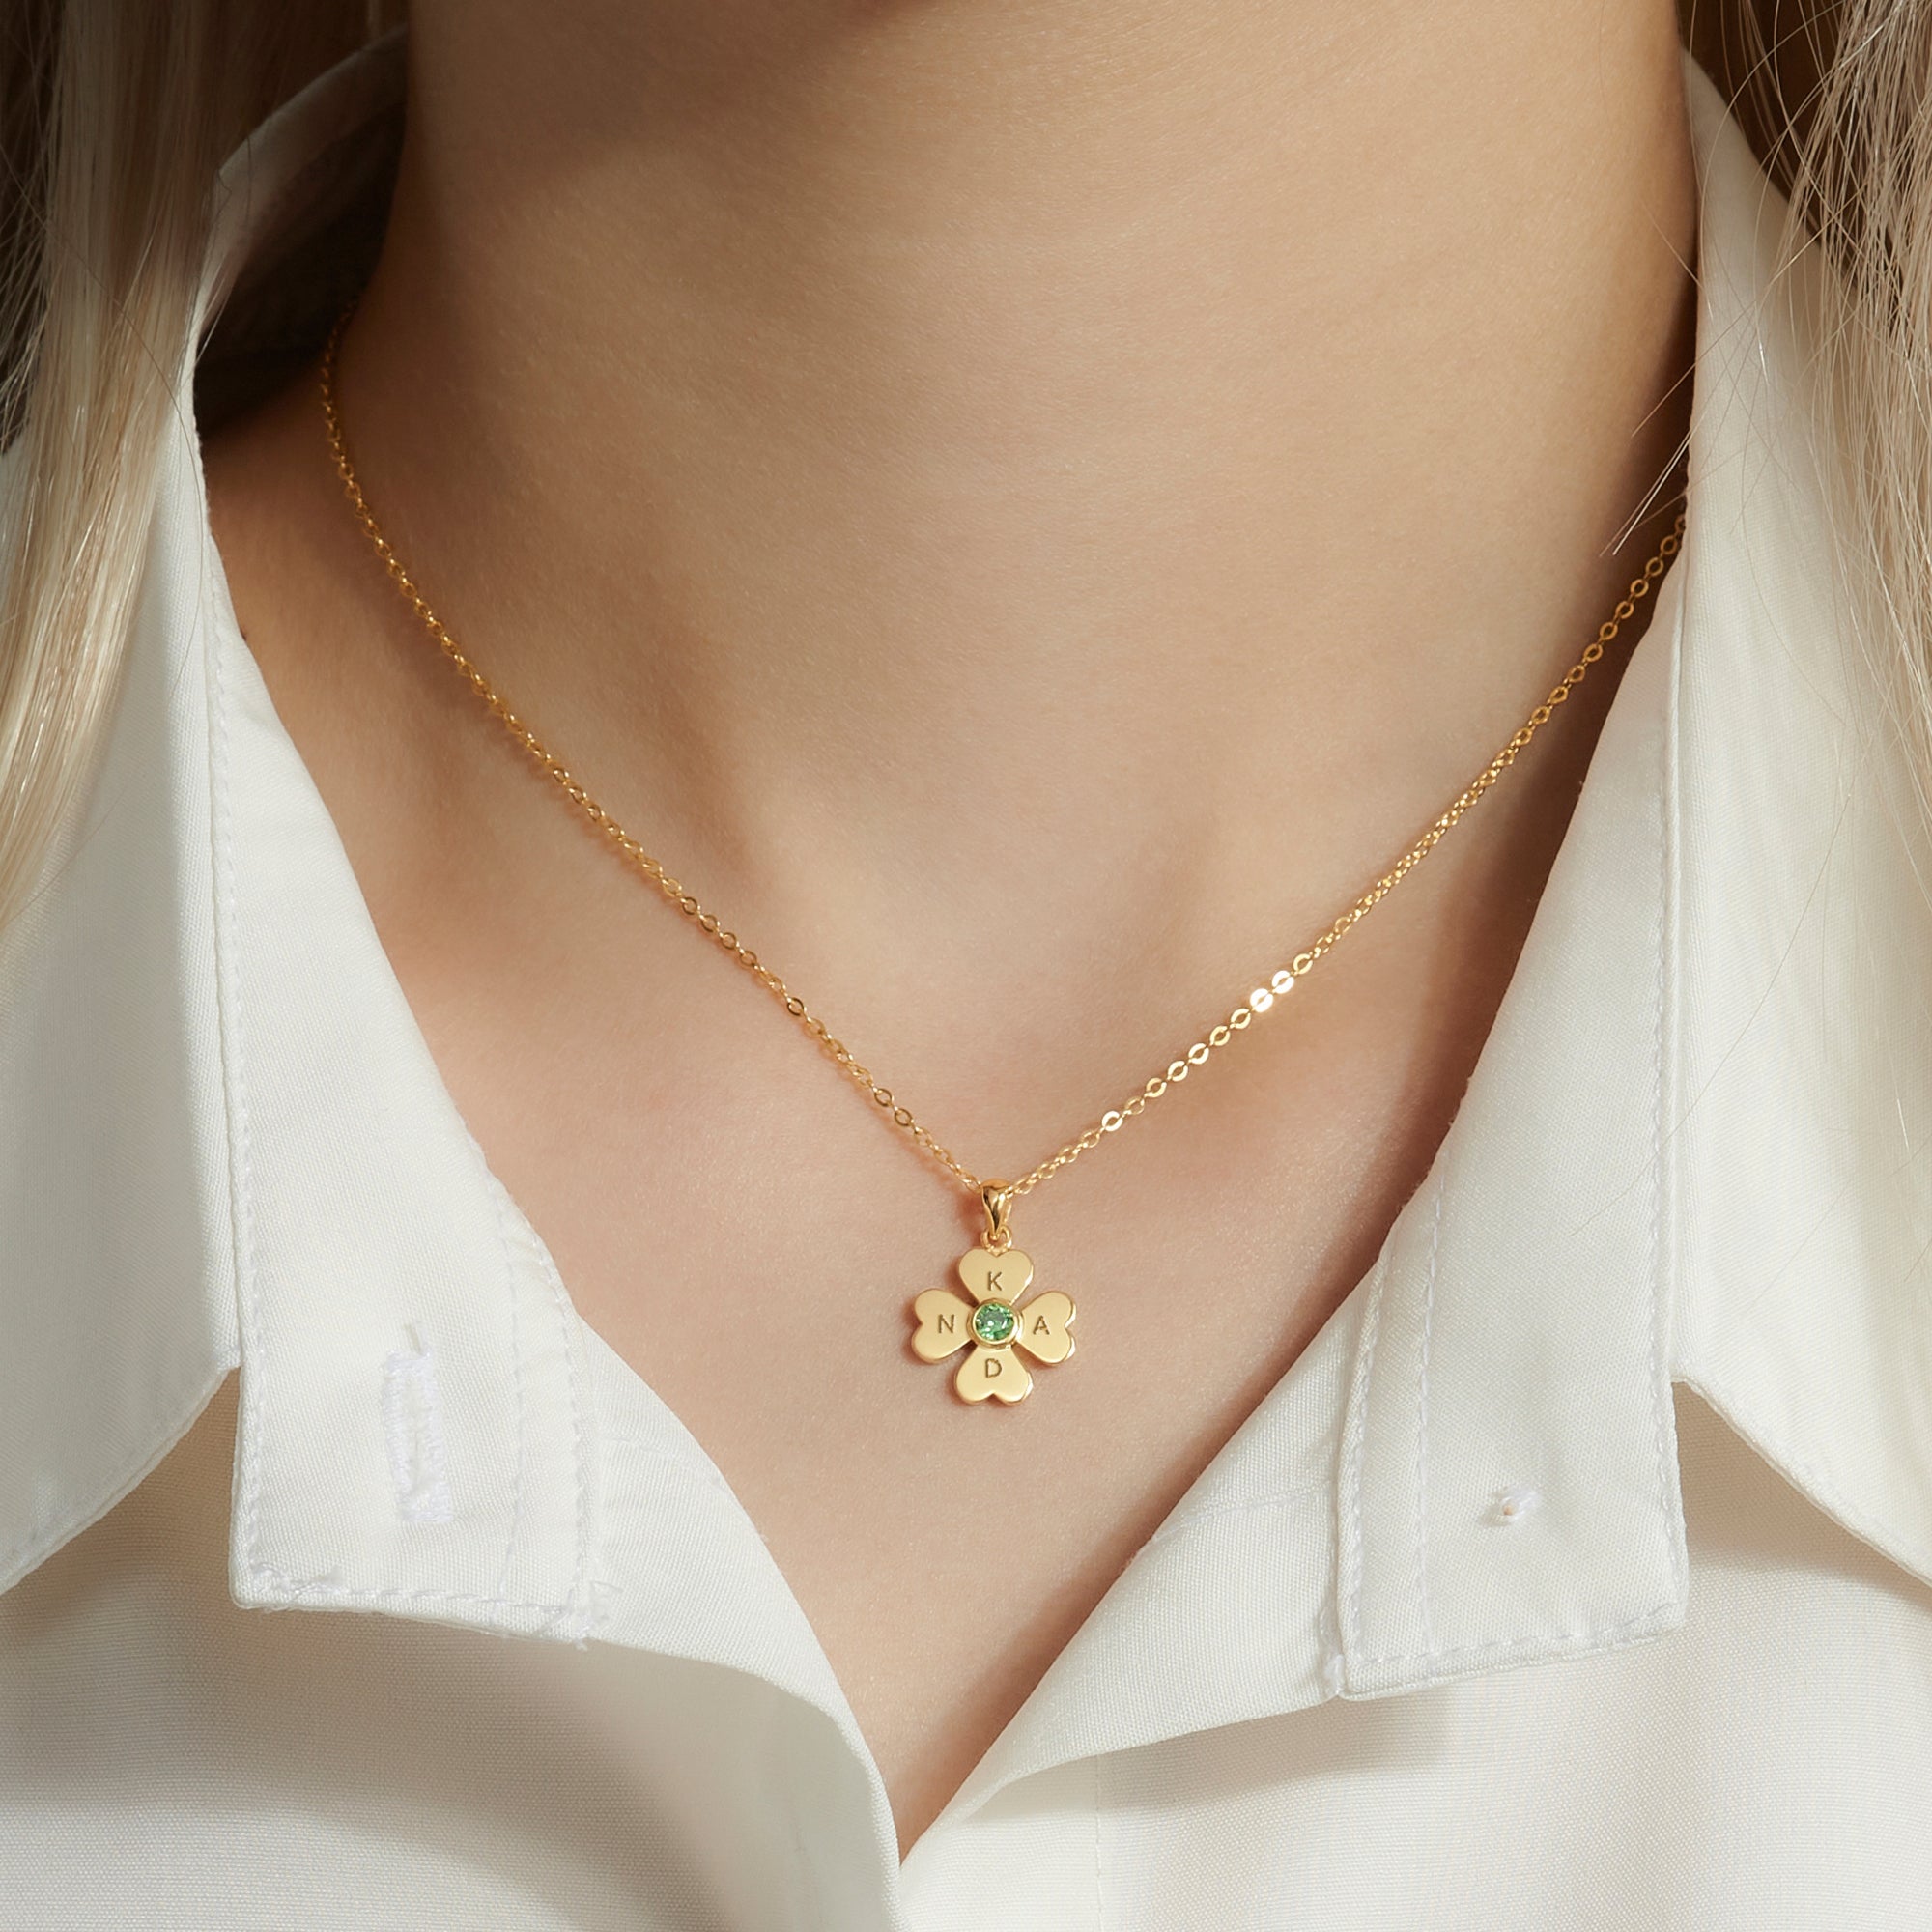 Personalized Four Leaf Clover Necklace with Kids' Initials and Mom Birthstone - 925 Sterling Silver and 18K Gold Plated Pendant for Mother's Day Gift - Necklaces - Bijou Her -  -  - 